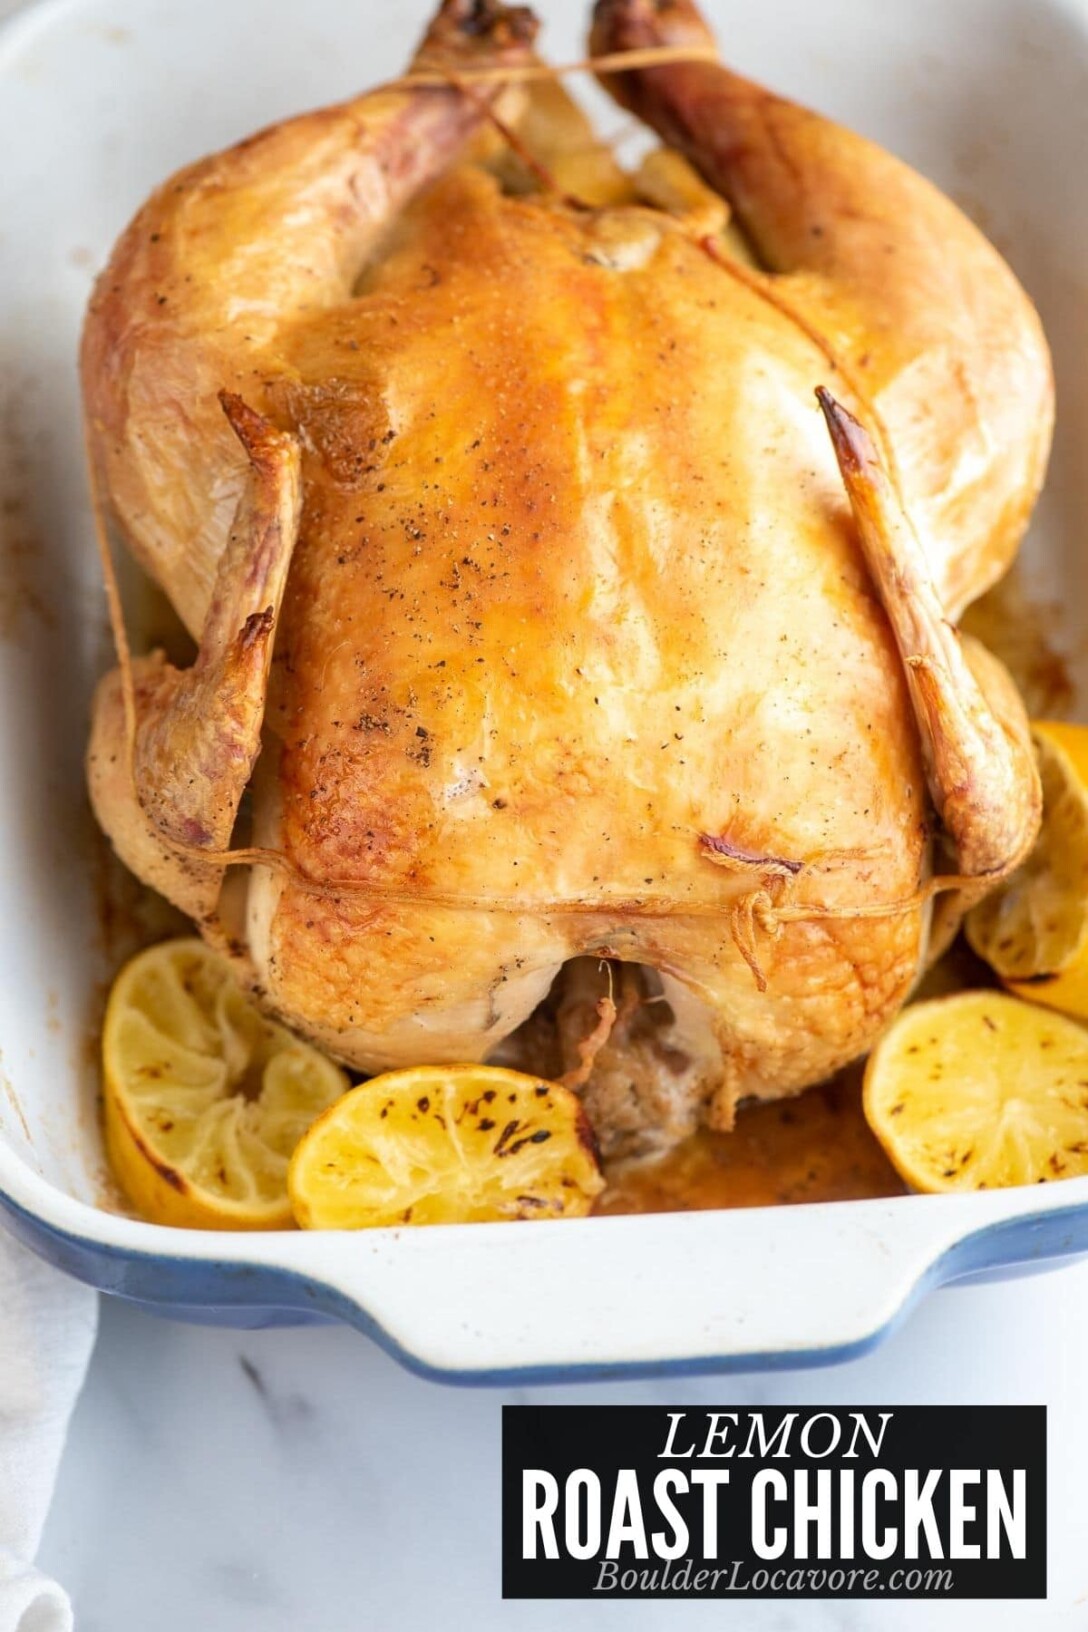 LEMON ROAST CHICKEN with text TITLE